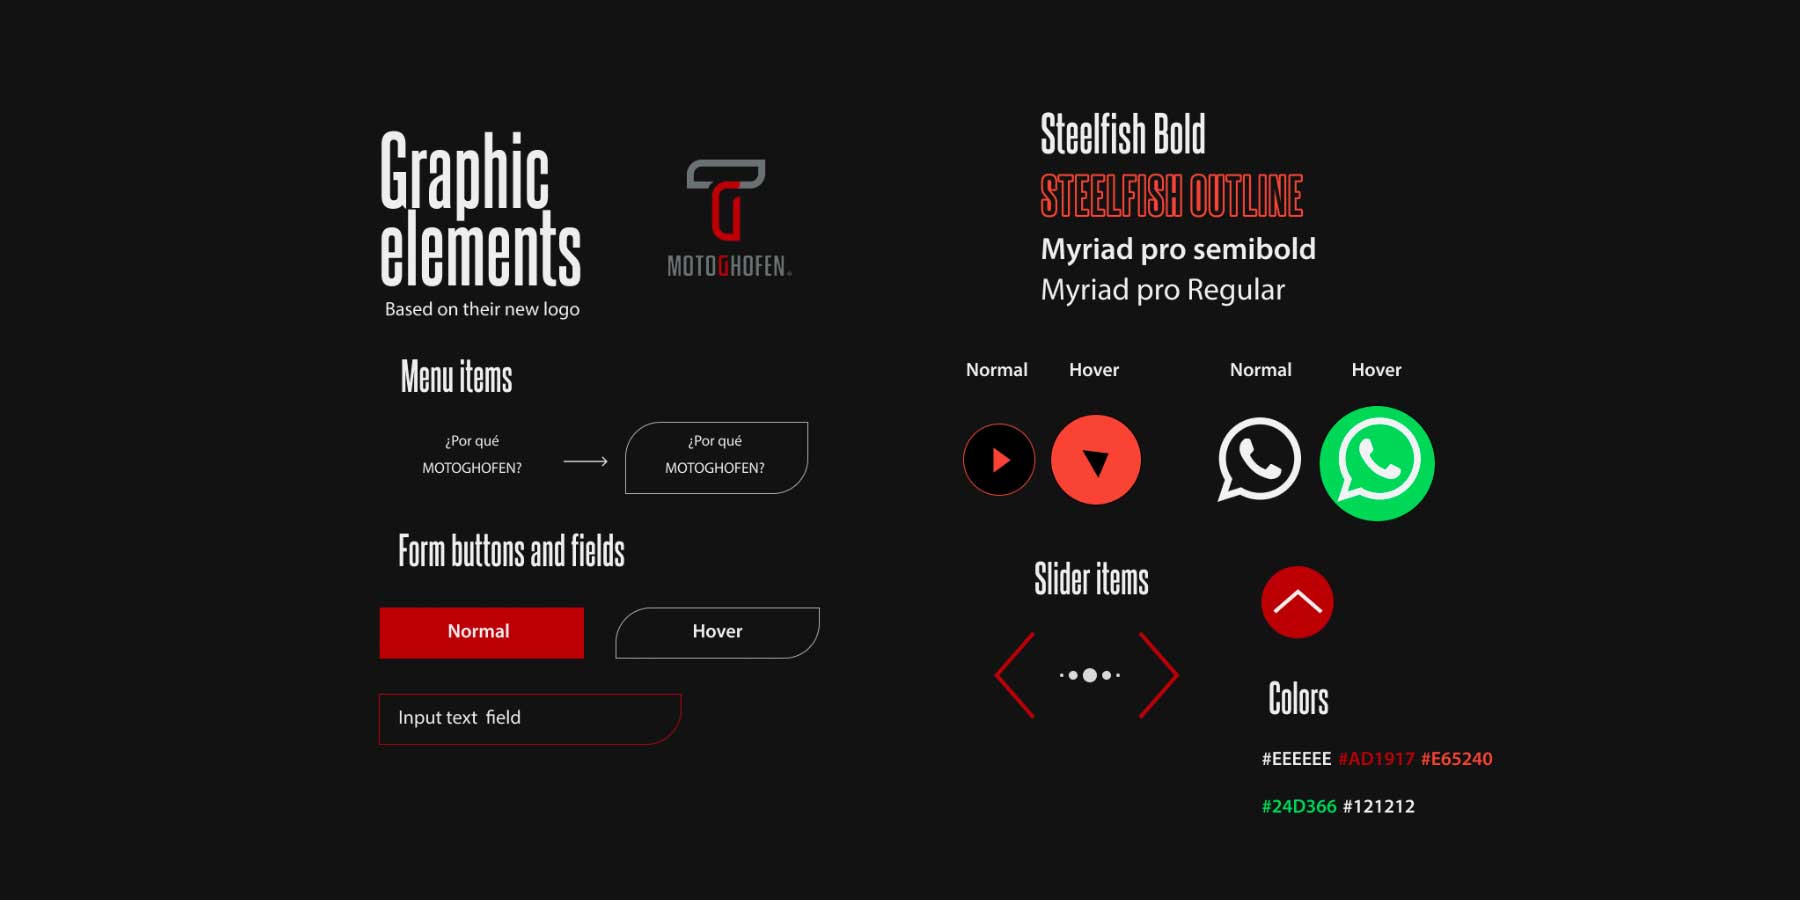 MOTOGHOFEN graphic elements used across the landing page.